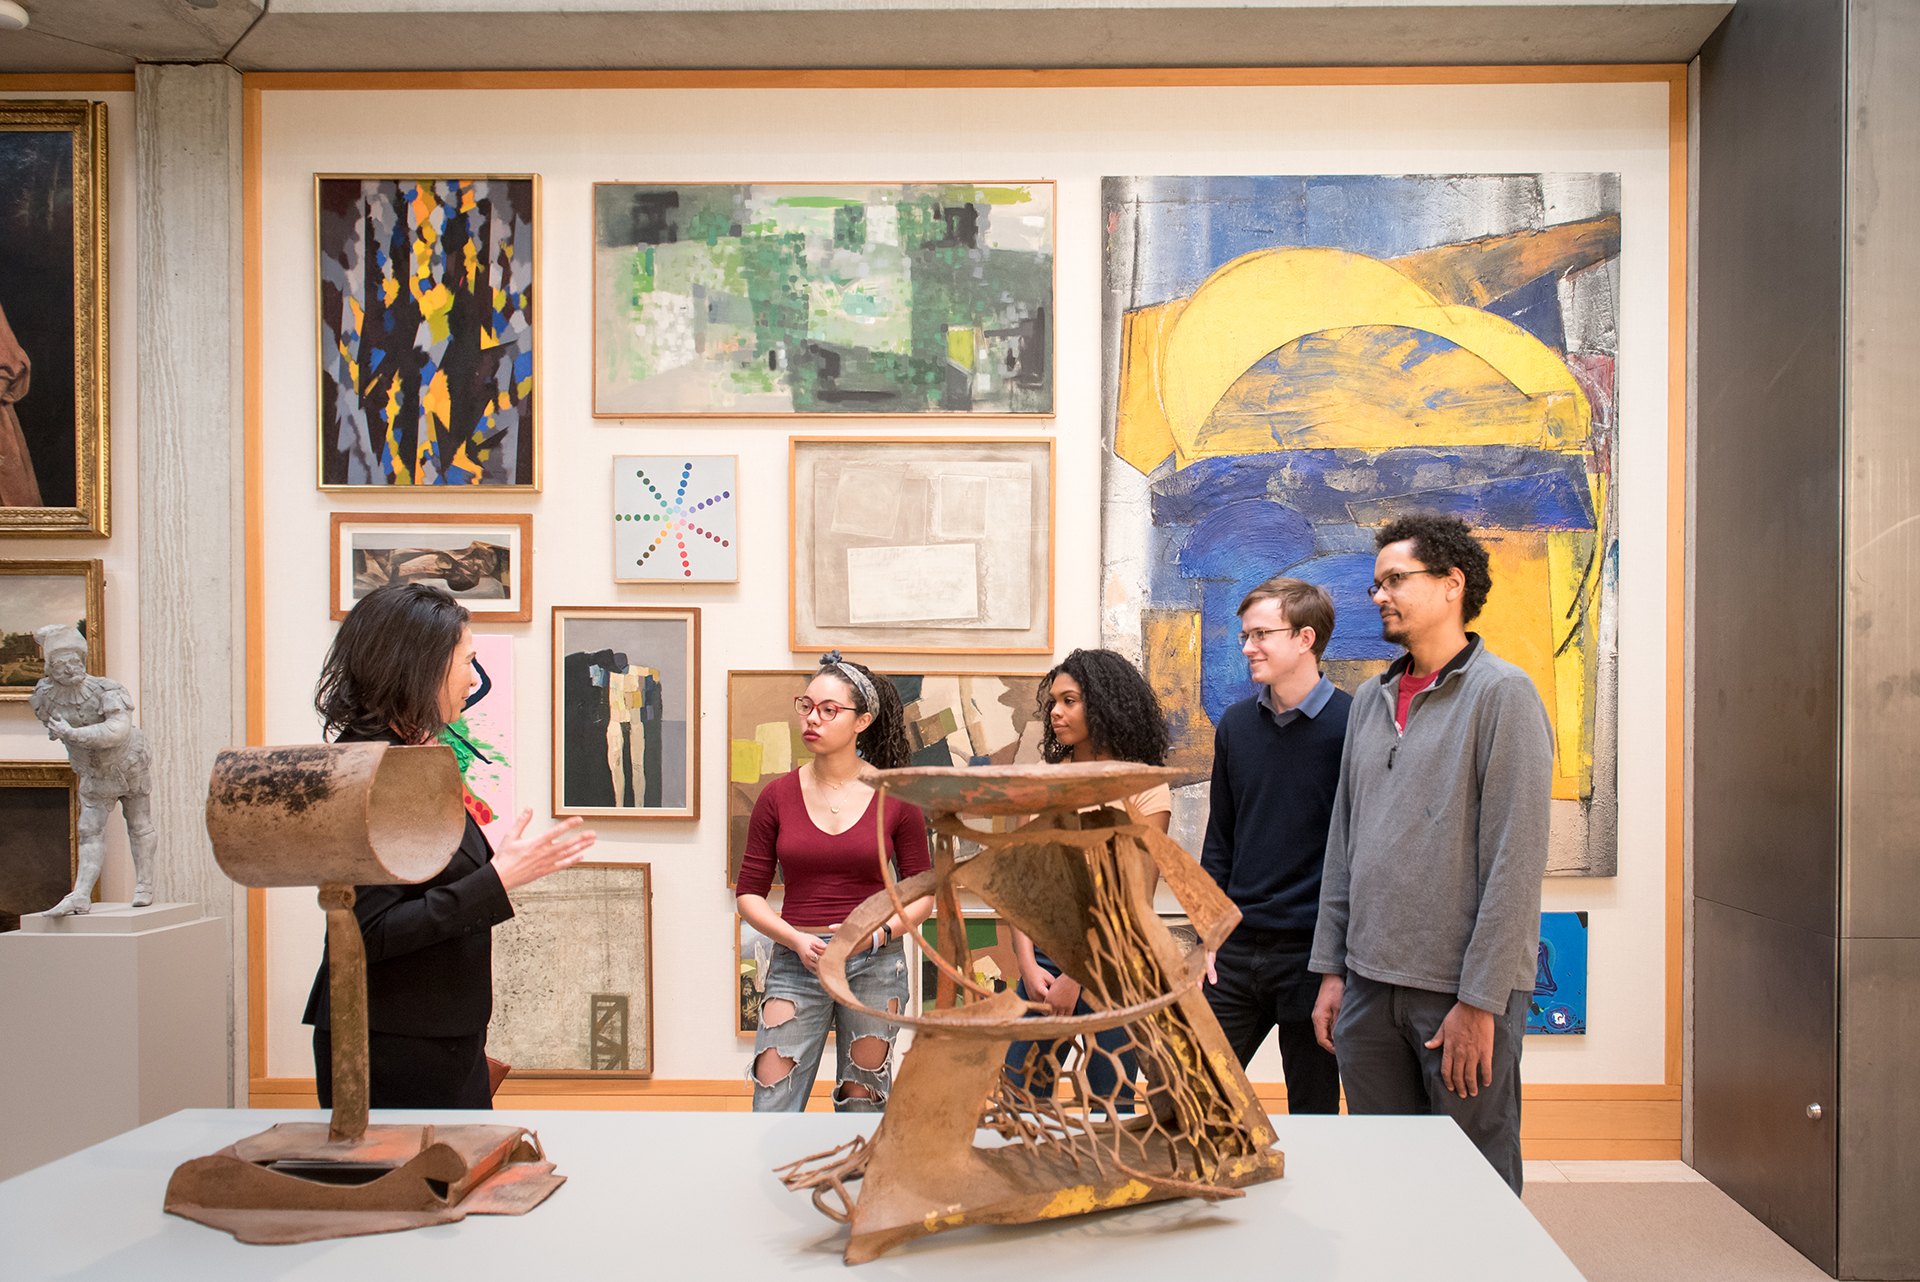 students in conversation in a gallery